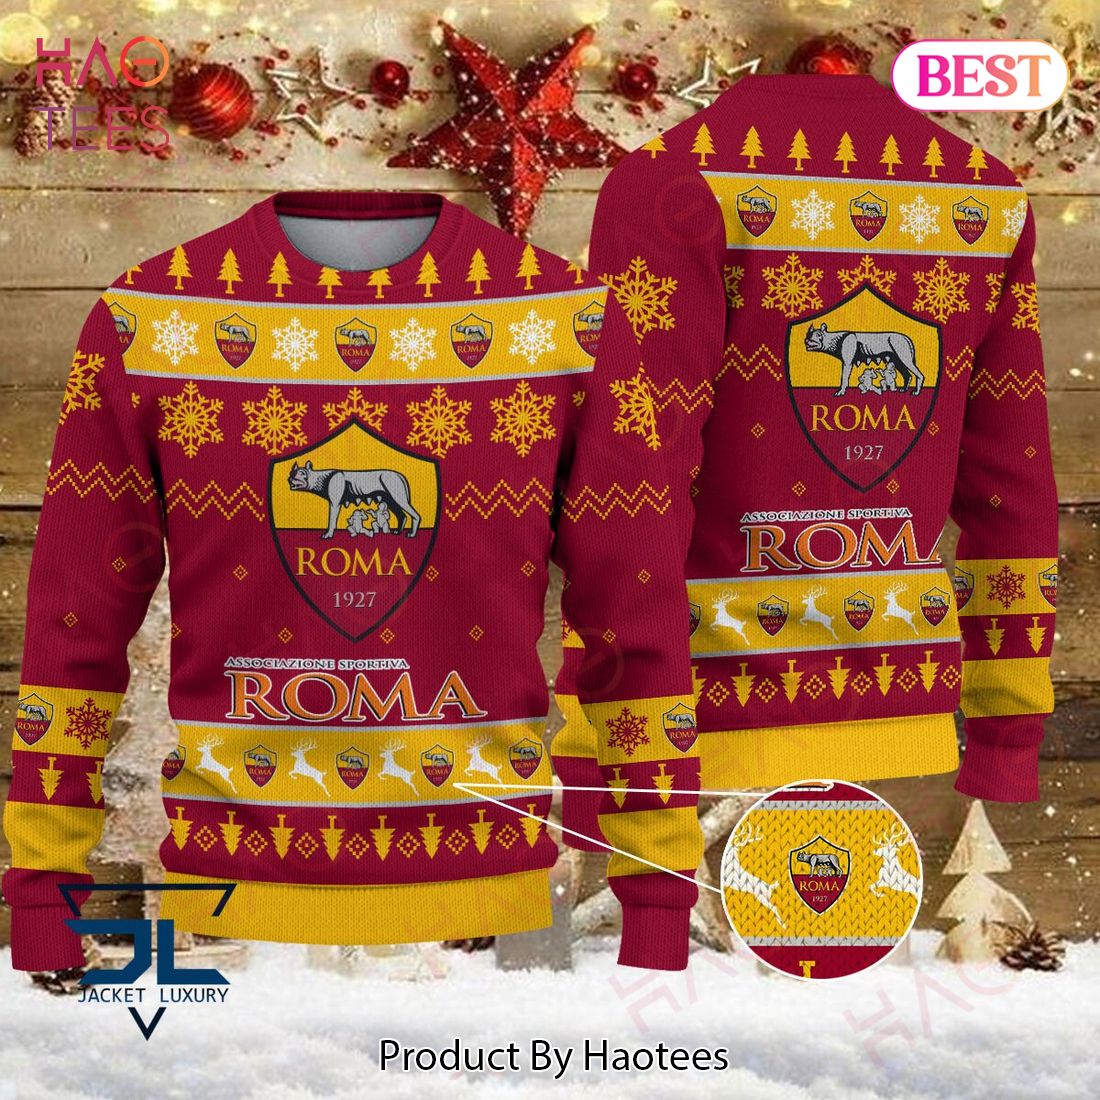 redskins ugly christmas sweater